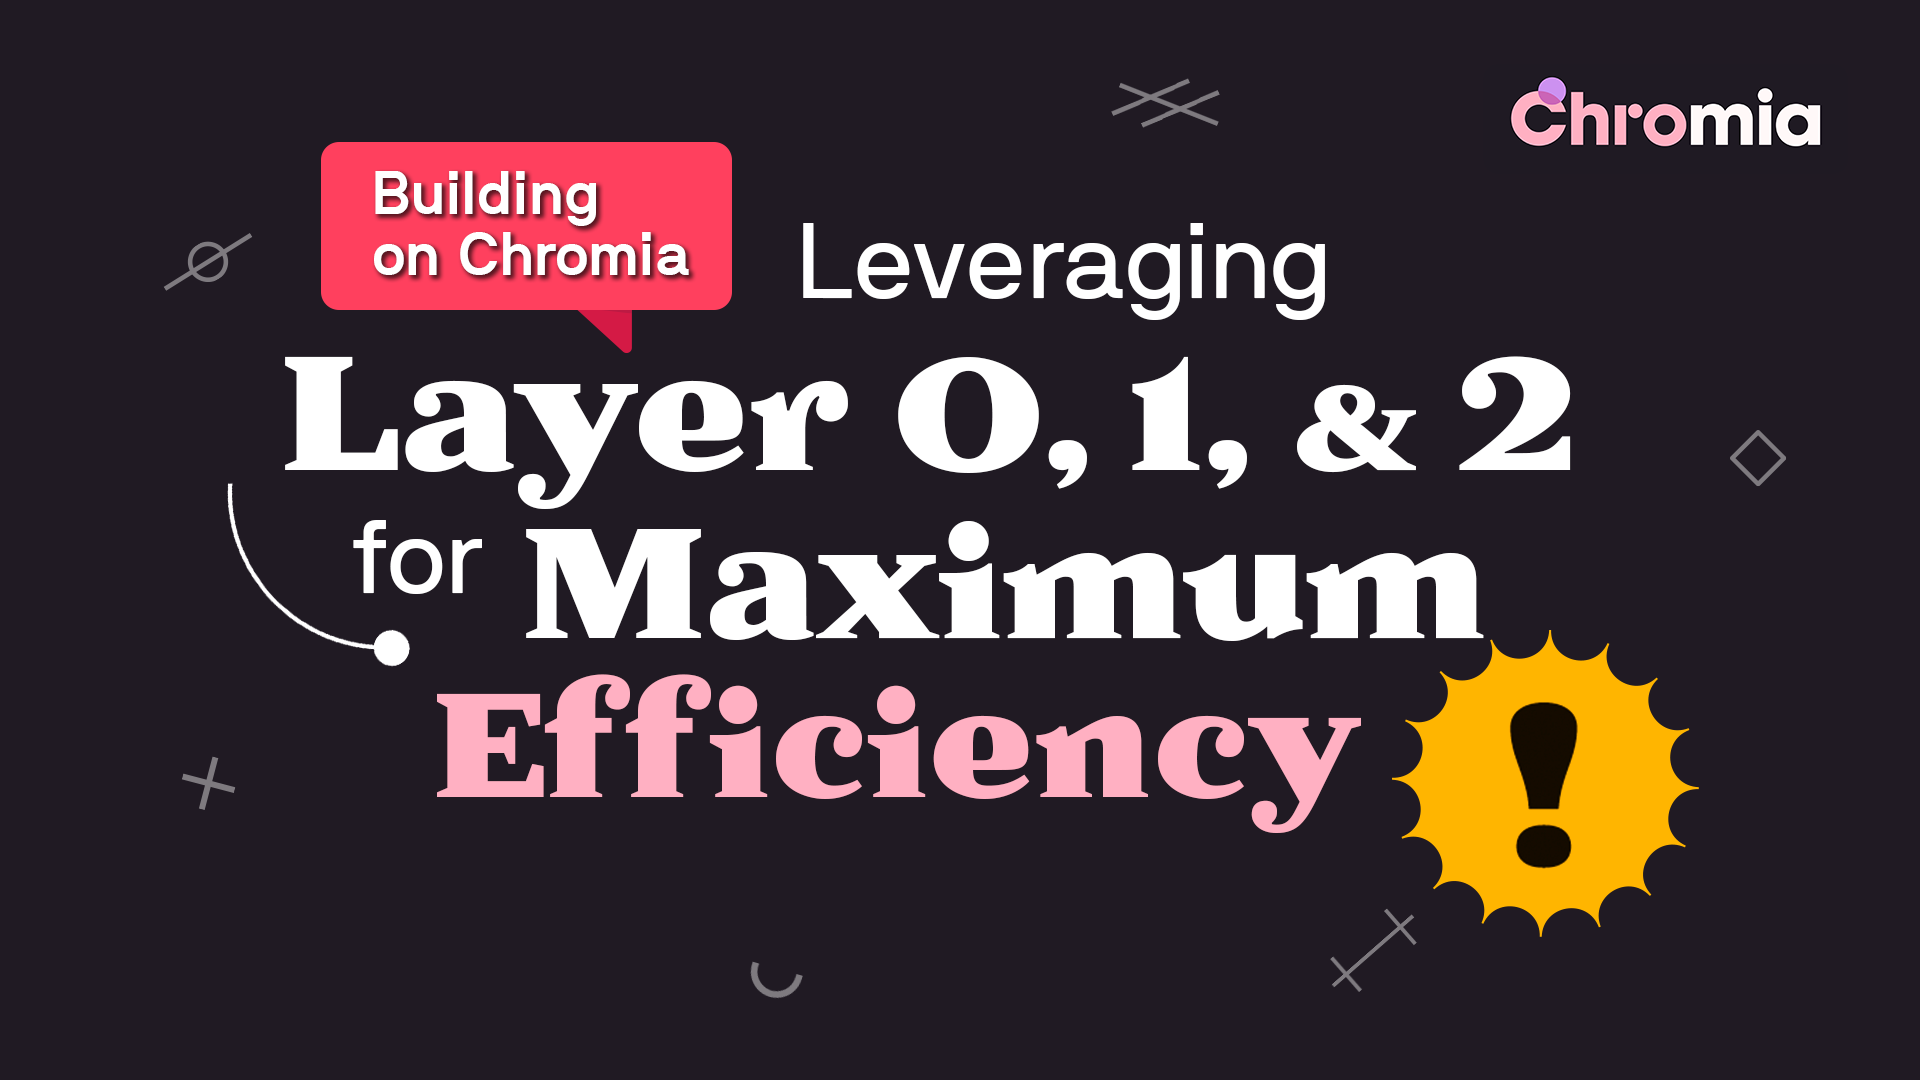 Building on Chromia: Leveraging Layer 0, 1, and 2 for Maximum Efficiency